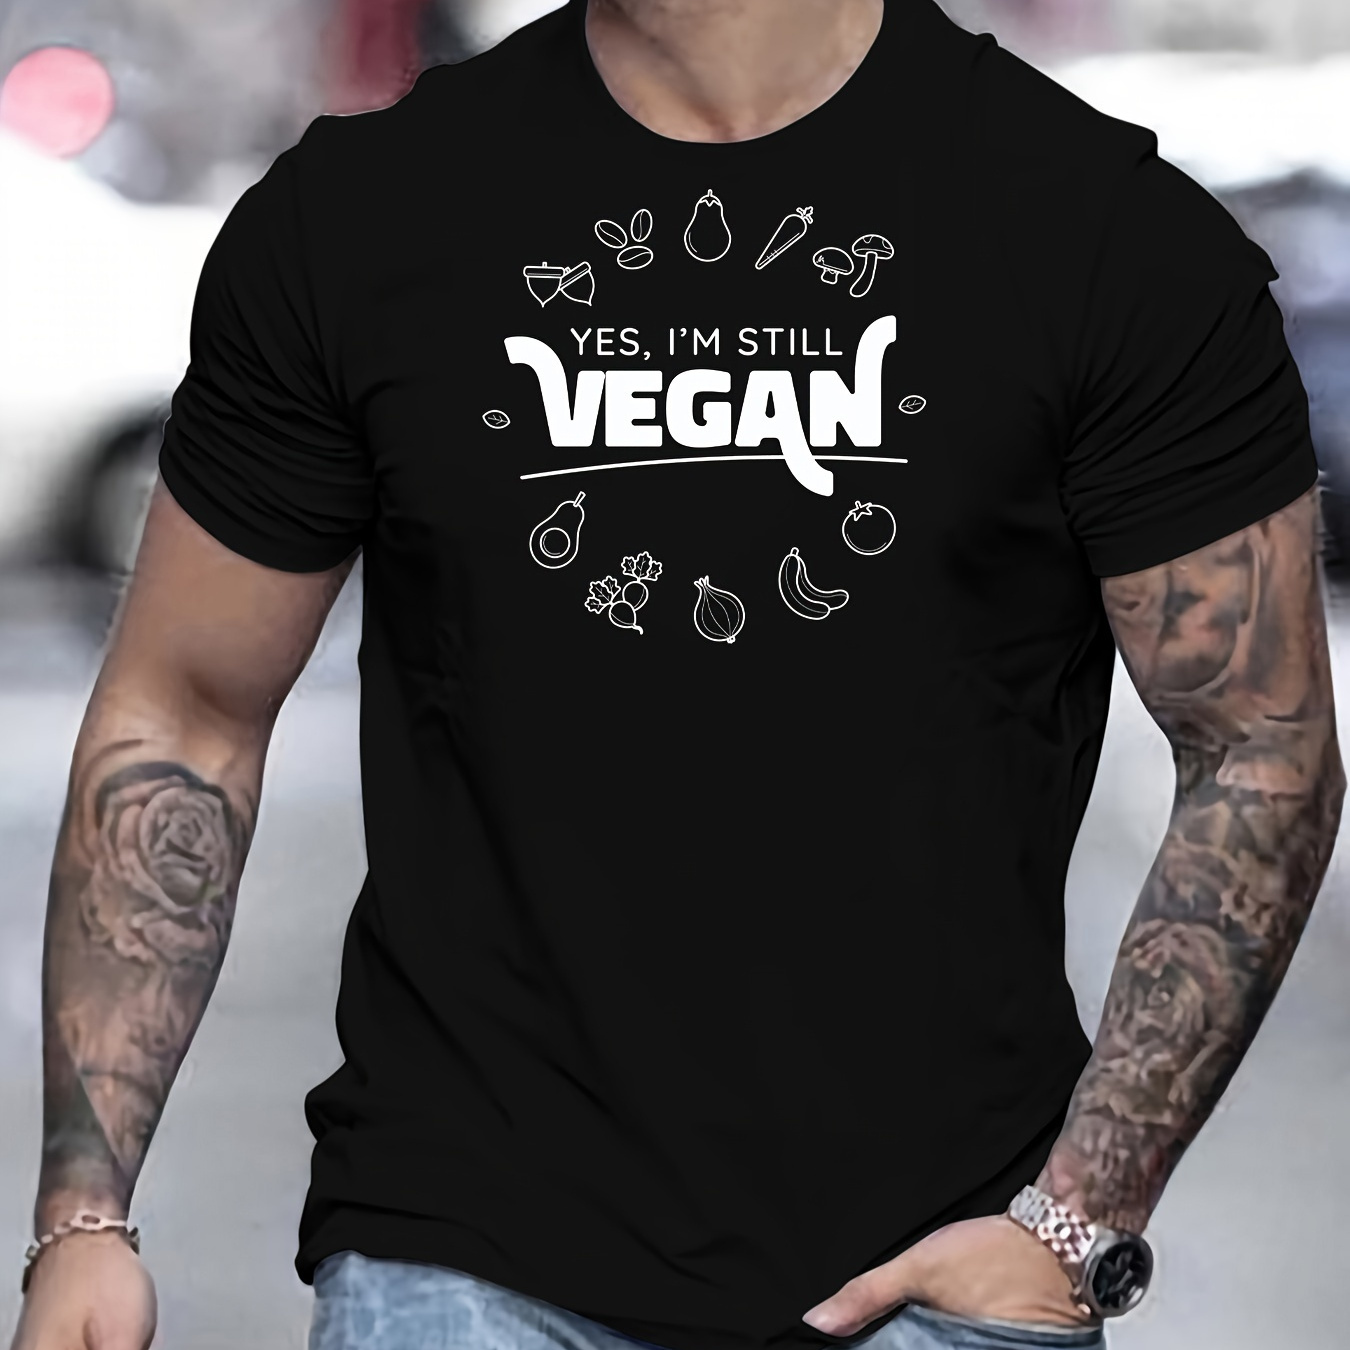 

Vegan Vegetable Print, Men's Round Crew Neck Short Sleeve, Simple Style Tee Fashion Regular Fit T-shirt, Casual Comfy Top For Spring Summer Holiday Leisure Vacation Men's Clothing As Gift